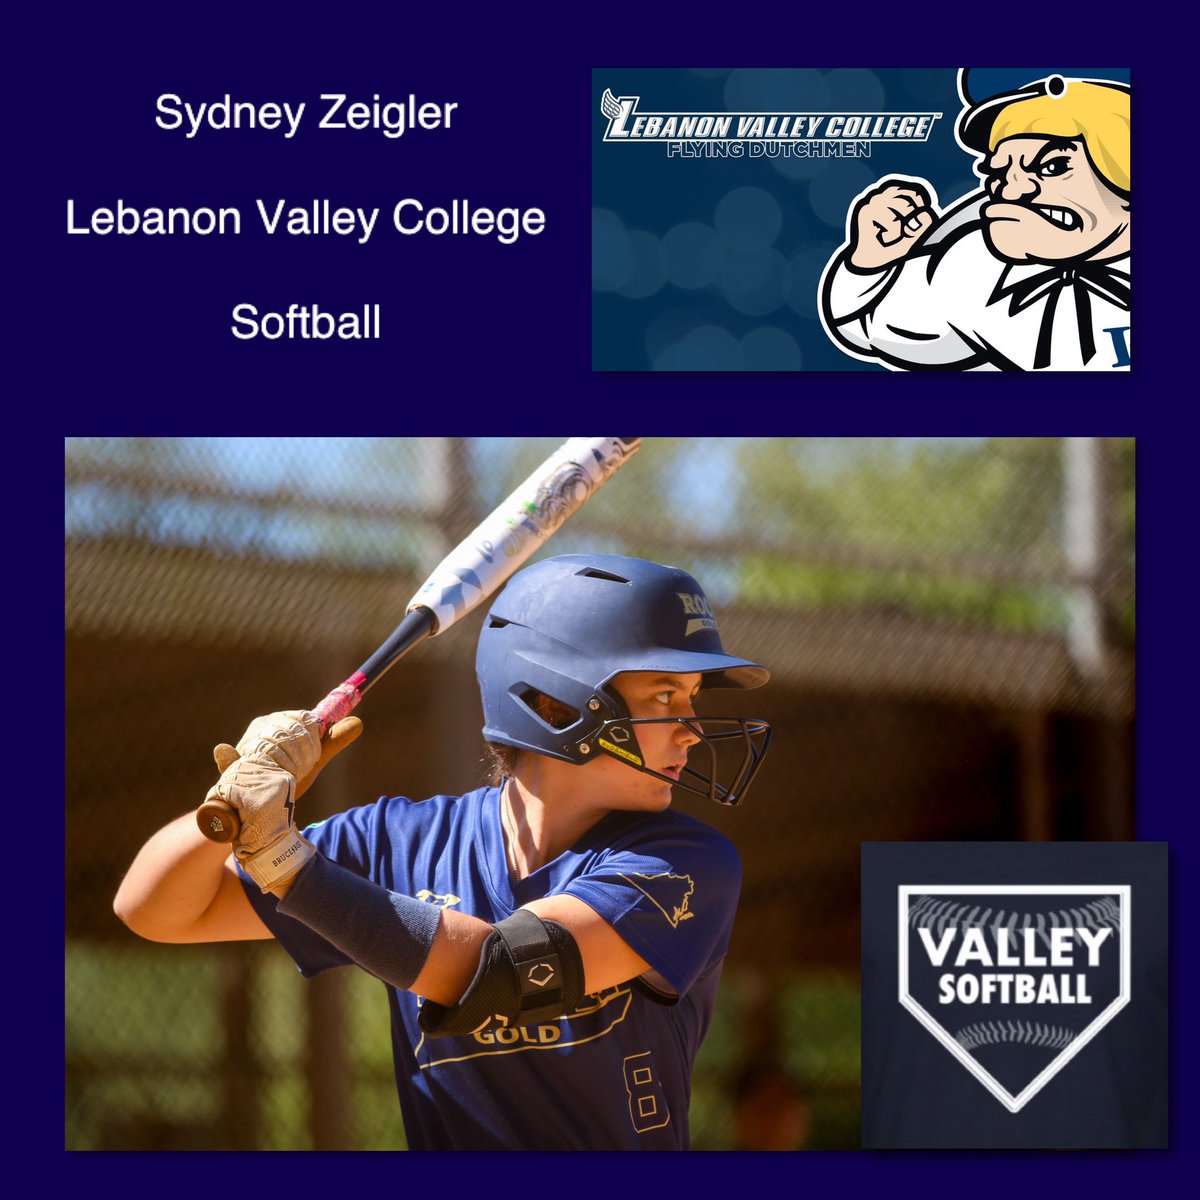 Congratulations to Sydney Zeigler on her commitment to further her education and softball career at Lebanon Valley College! Your ROCK family is so happy for you! #TogetherWeROCK #GoValley @SydZeigler2025 @LVCsoftball @LVCathletics @LVC @RockGoldVA16U